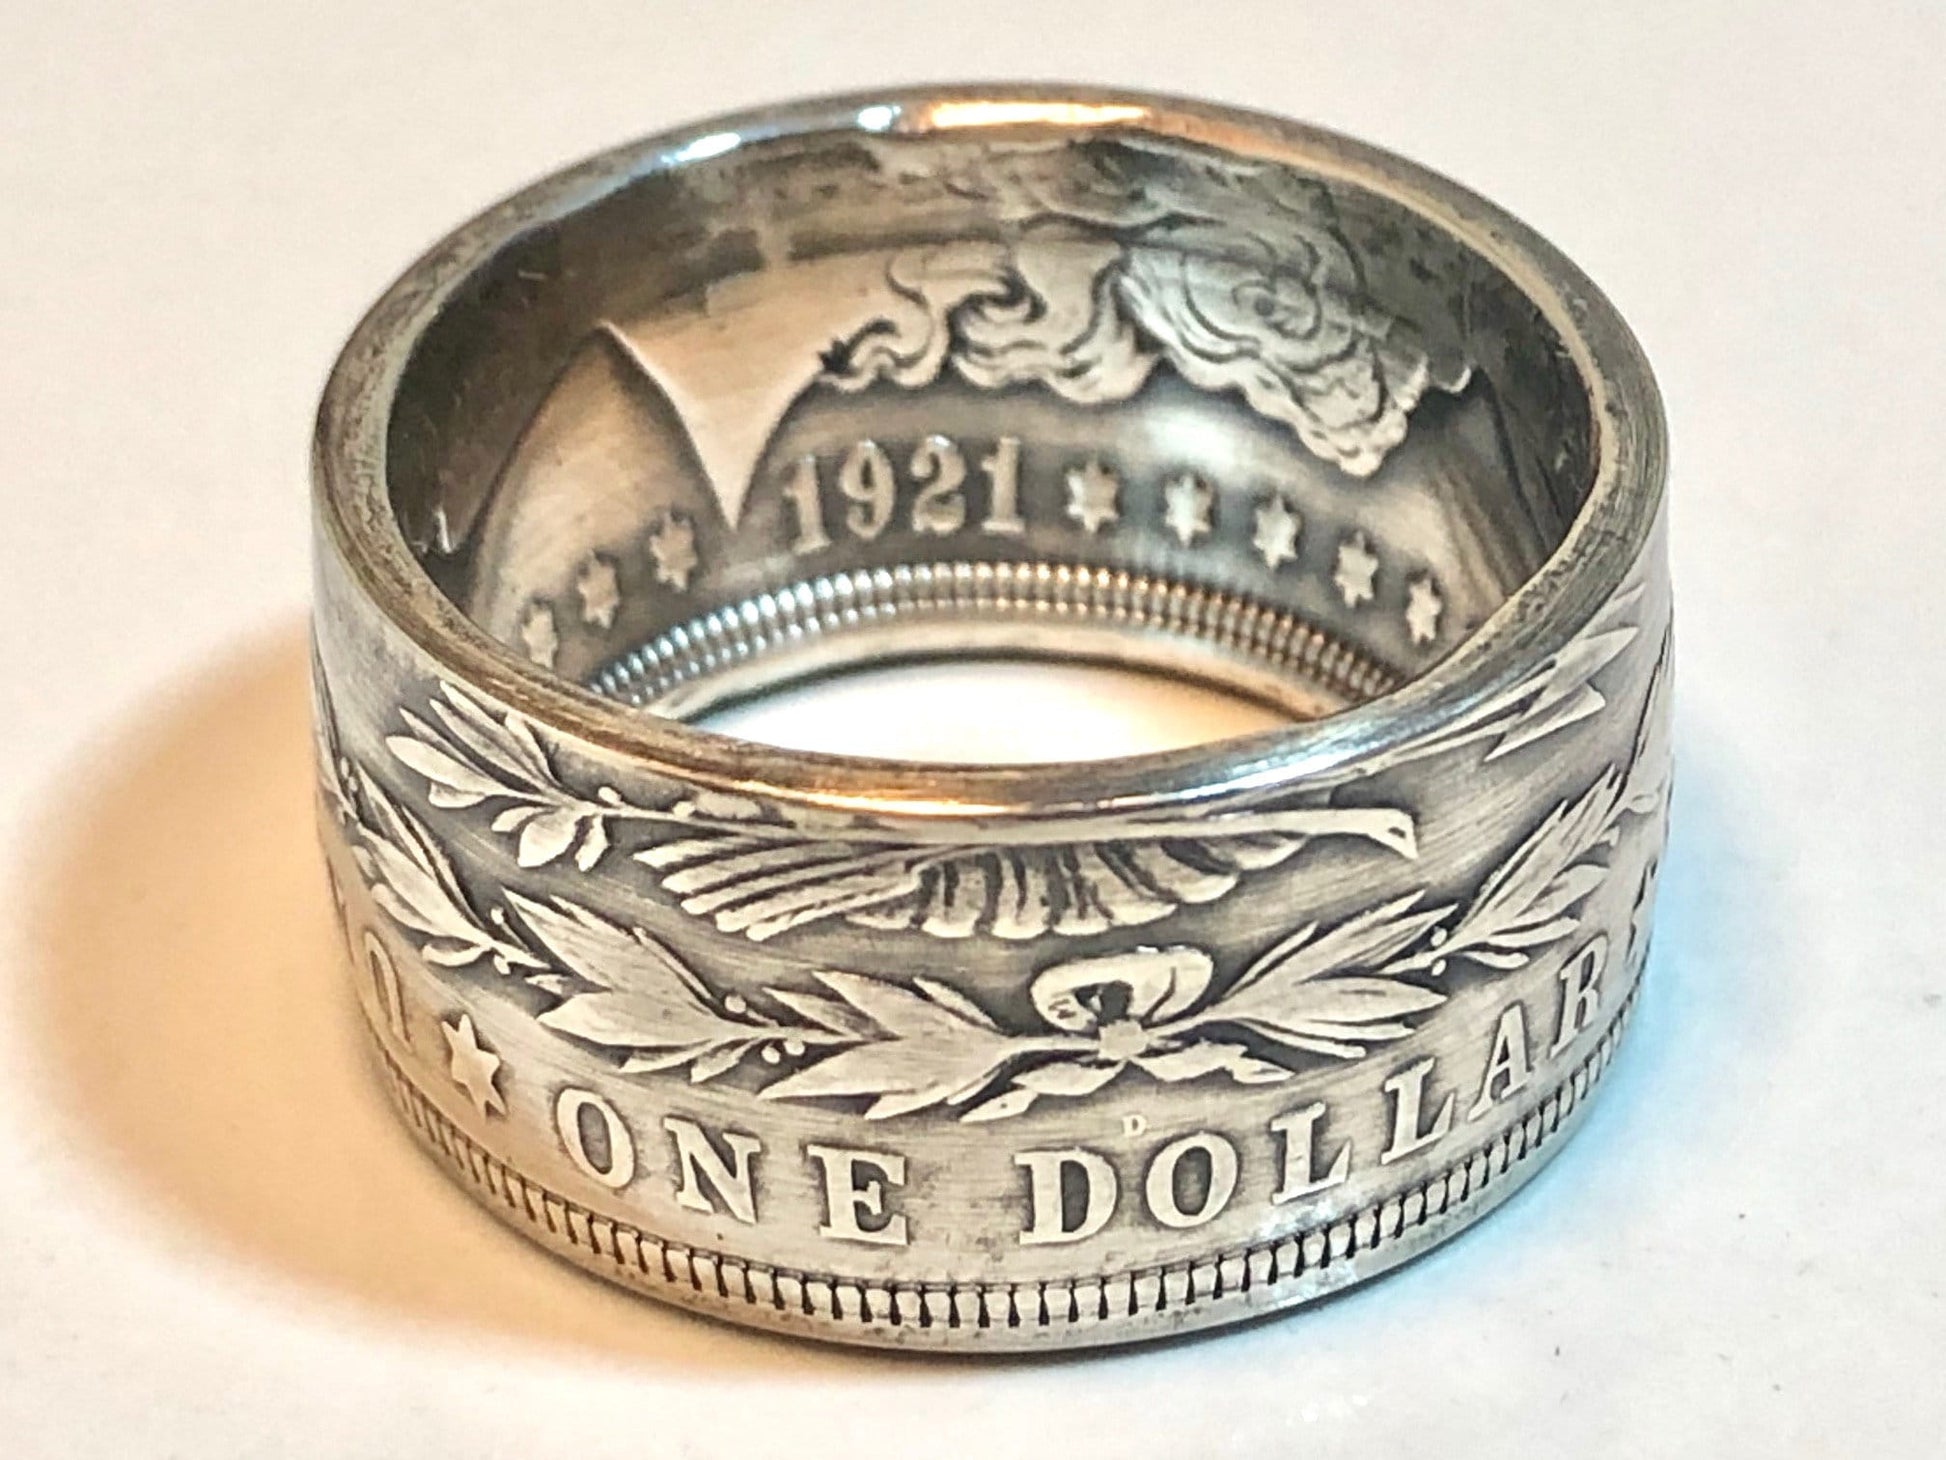 Morgan Dollar 1921 Ring Silver United States Coin Ring Personal Jewelry Ring Gift For Friend Coin Ring Gift For Him Her World Coin Collector